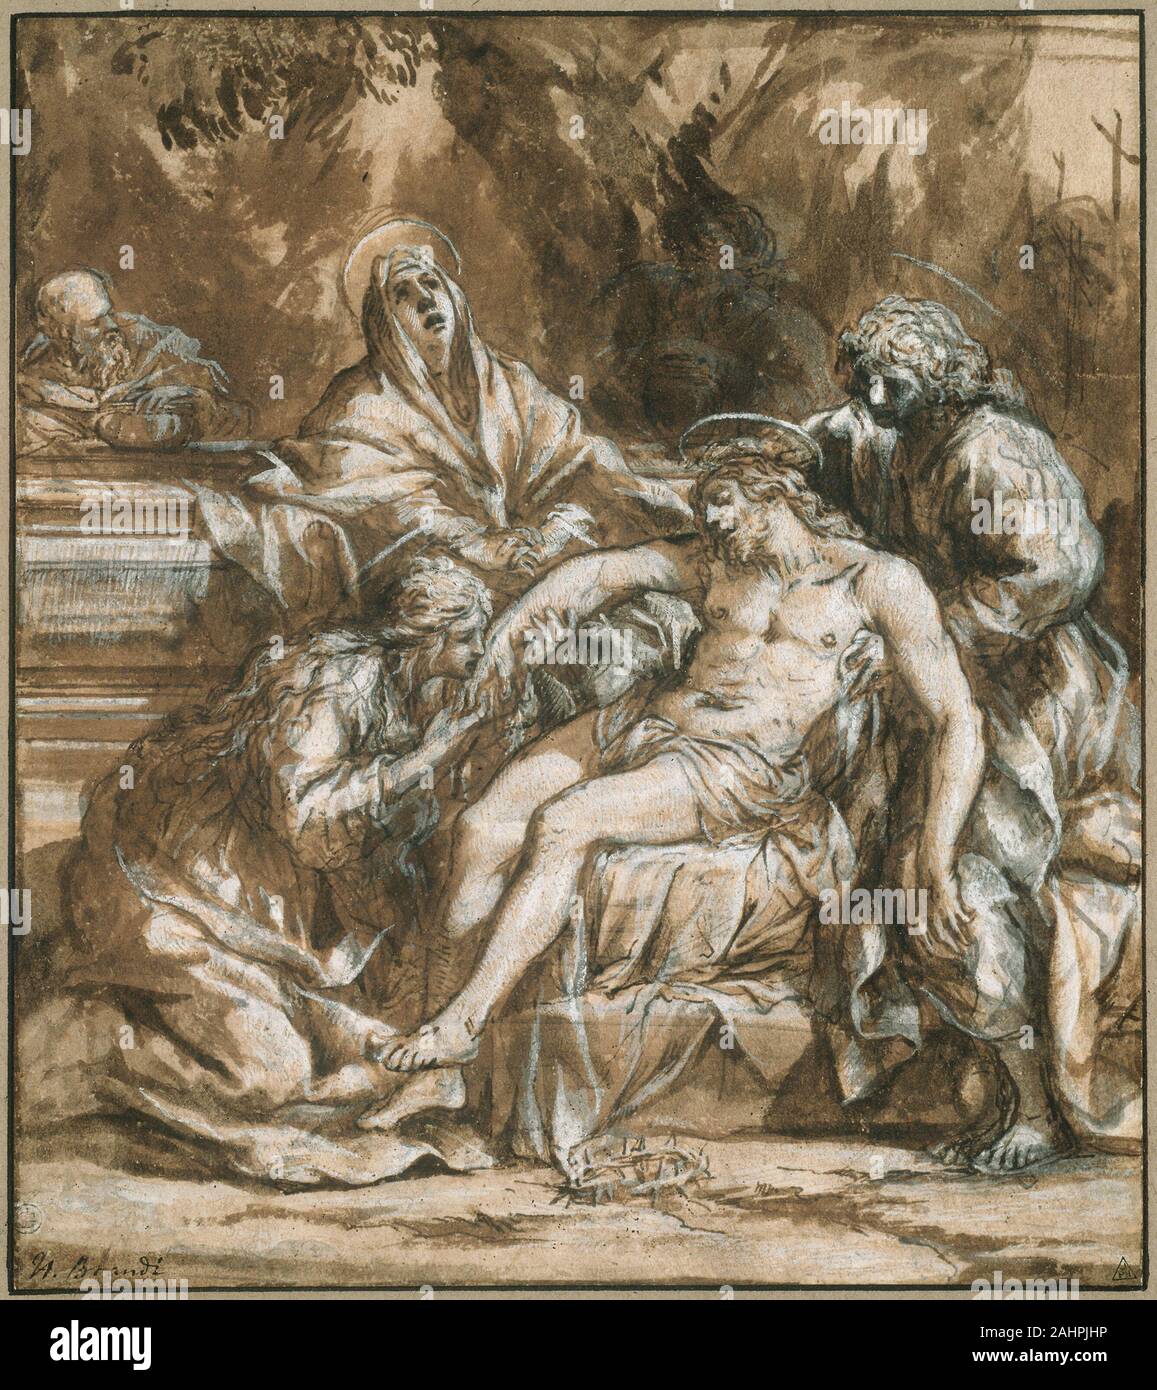 Pietro da Cortona. Lamentation over the Dead Christ. 1635. Italy. Pen and brown ink, with brush and brown wash, heightened with lead white gouache and traces of black chalk, on cream laid paper, laid down on brown laid paper Stock Photo